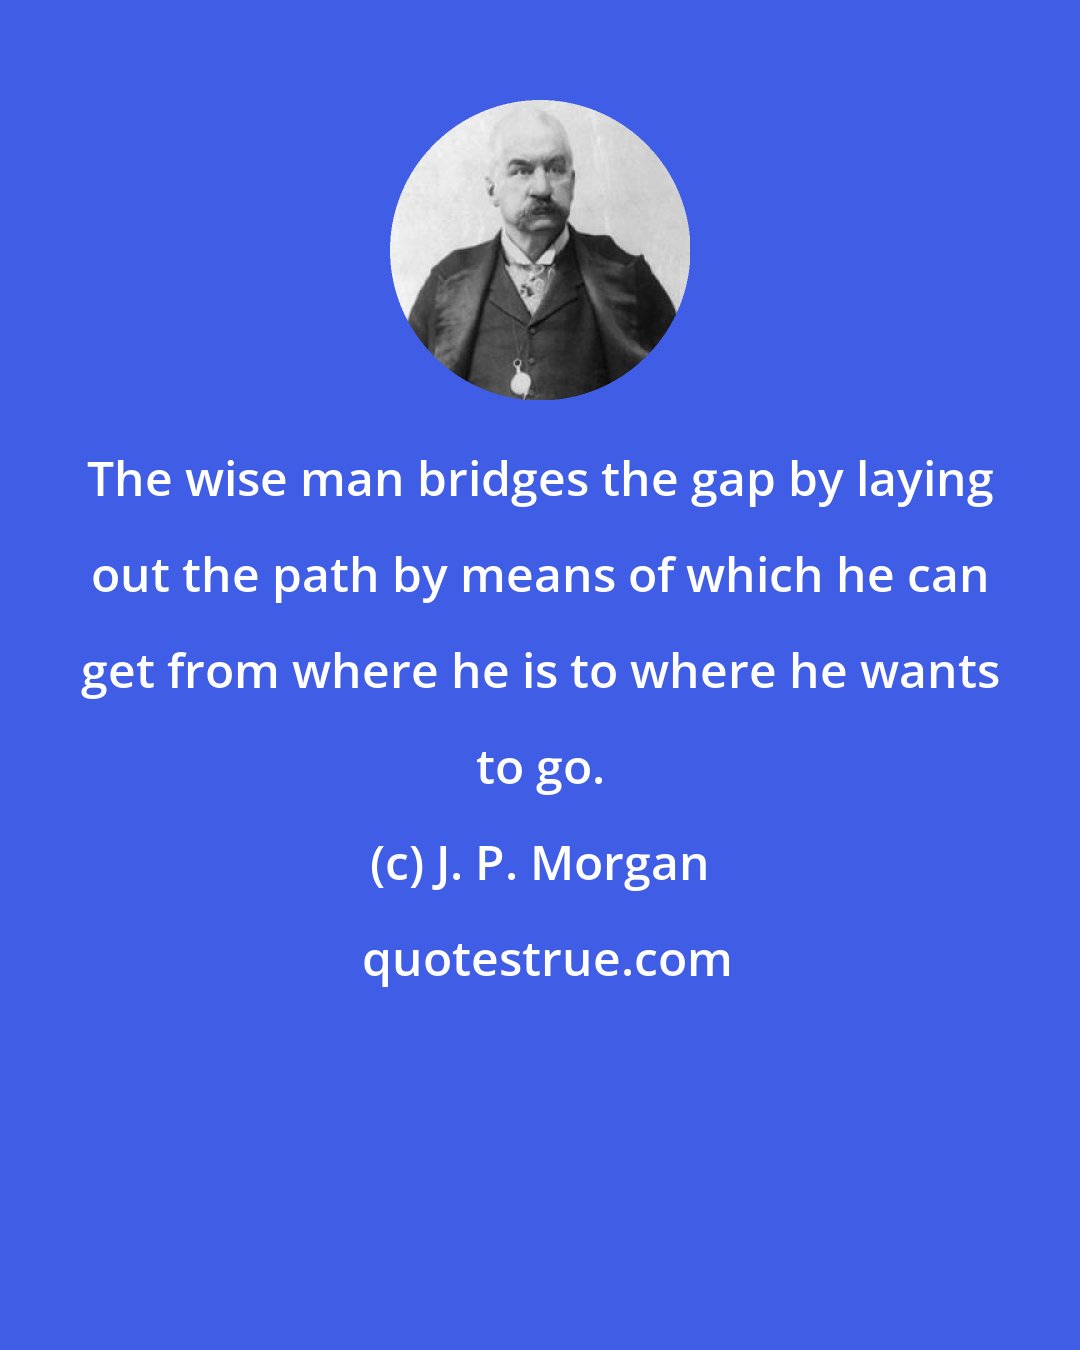 J. P. Morgan: The wise man bridges the gap by laying out the path by means of which he can get from where he is to where he wants to go.